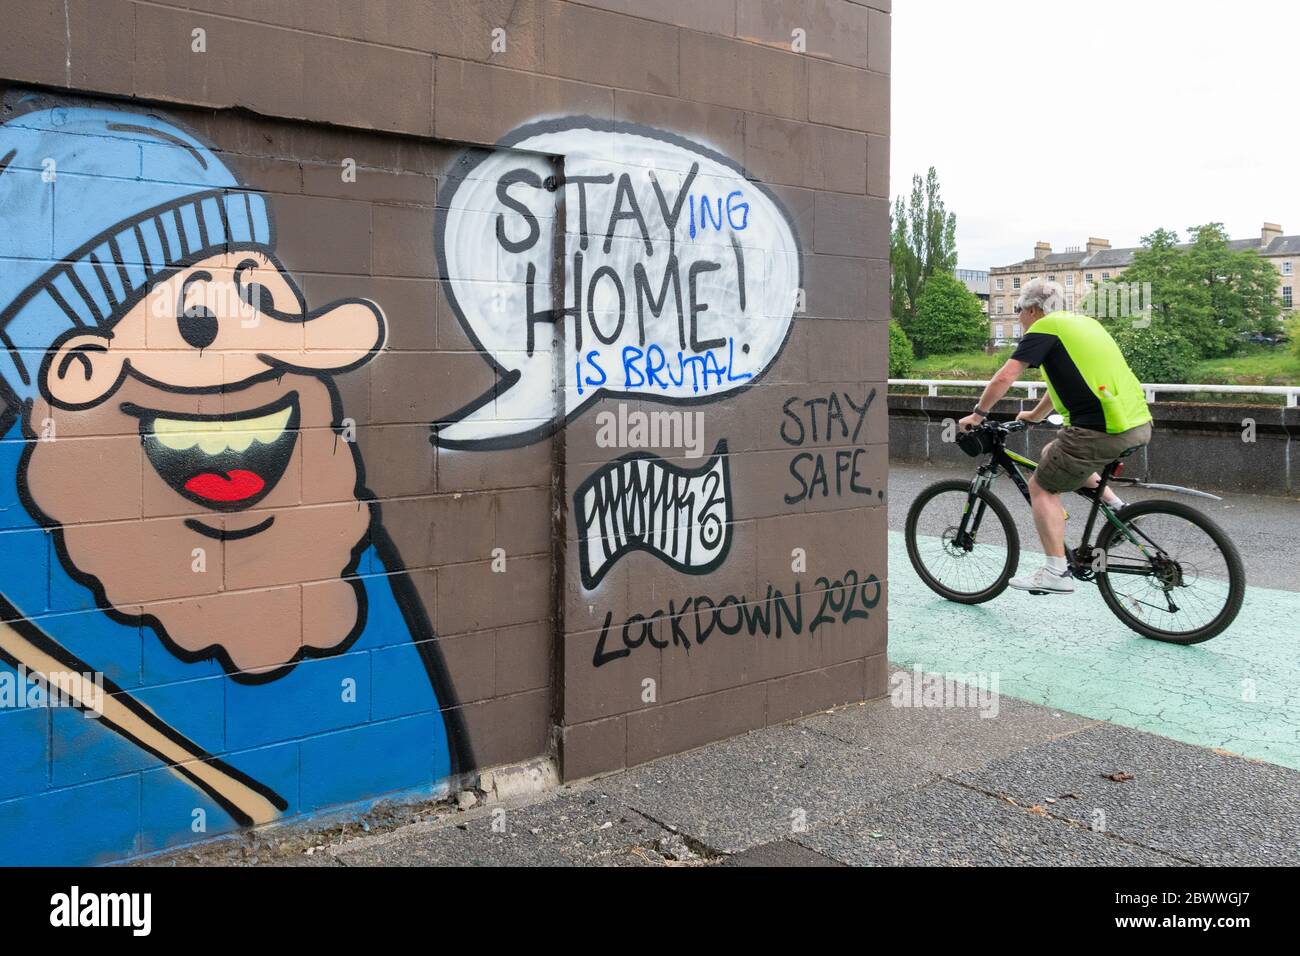 'Stay Home' graffiti  altered to read 'staying home is brutal' - Glasgow, Scotland, UK Stock Photo